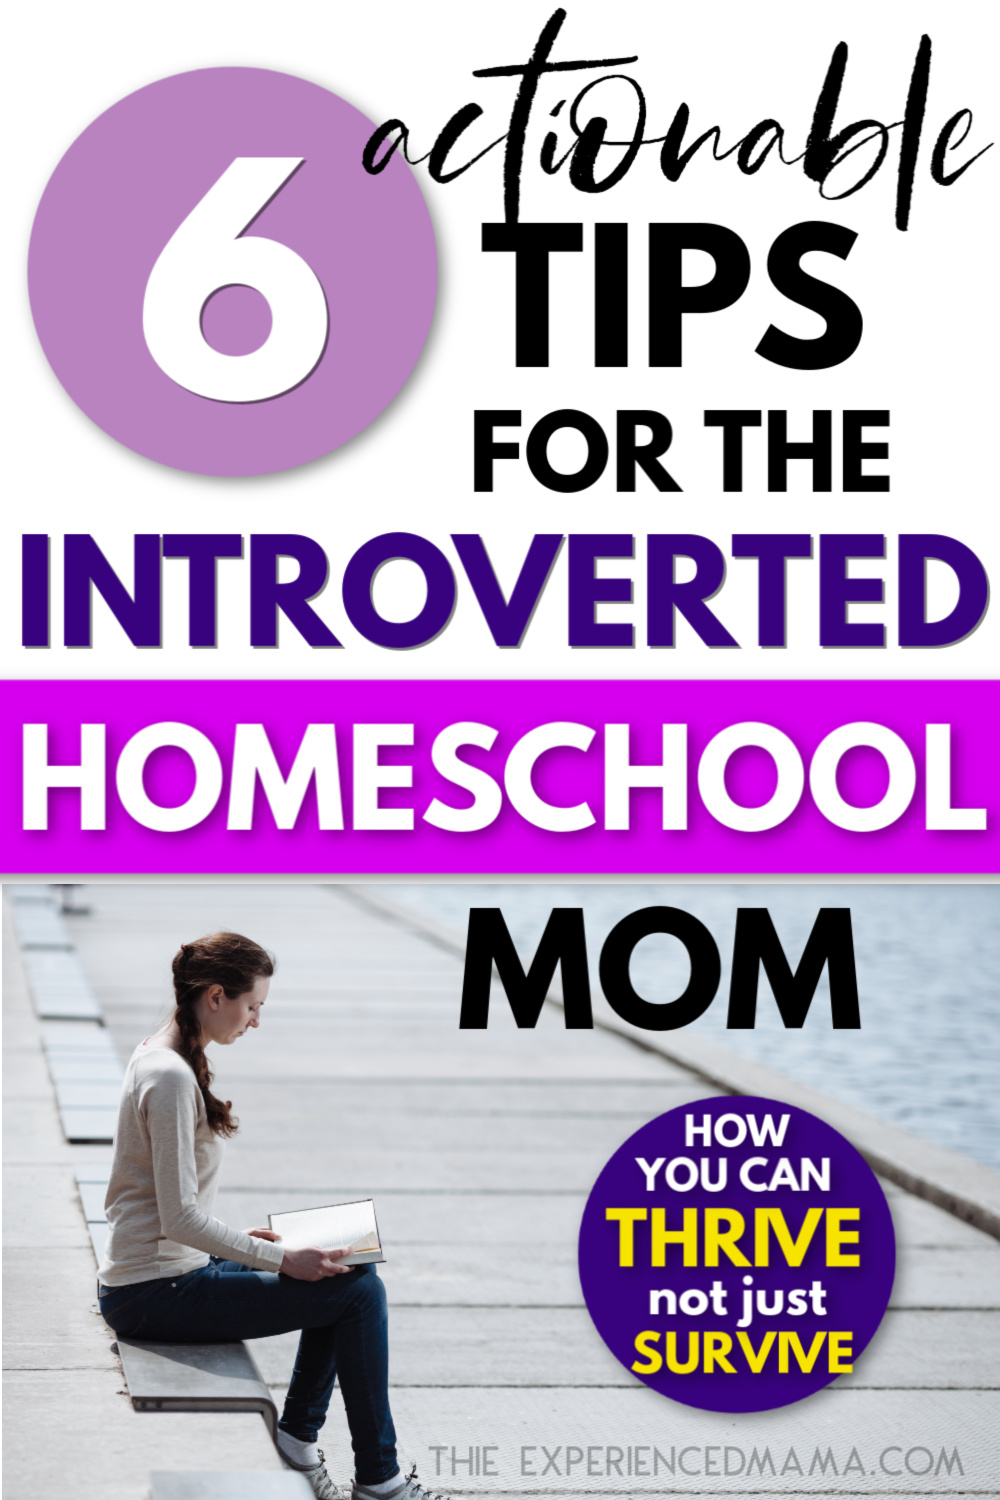 introverted mom reading alone on boardwalk near water, "6 actionable tips for the introverted homeschool mom - how you can thrive not just survive"